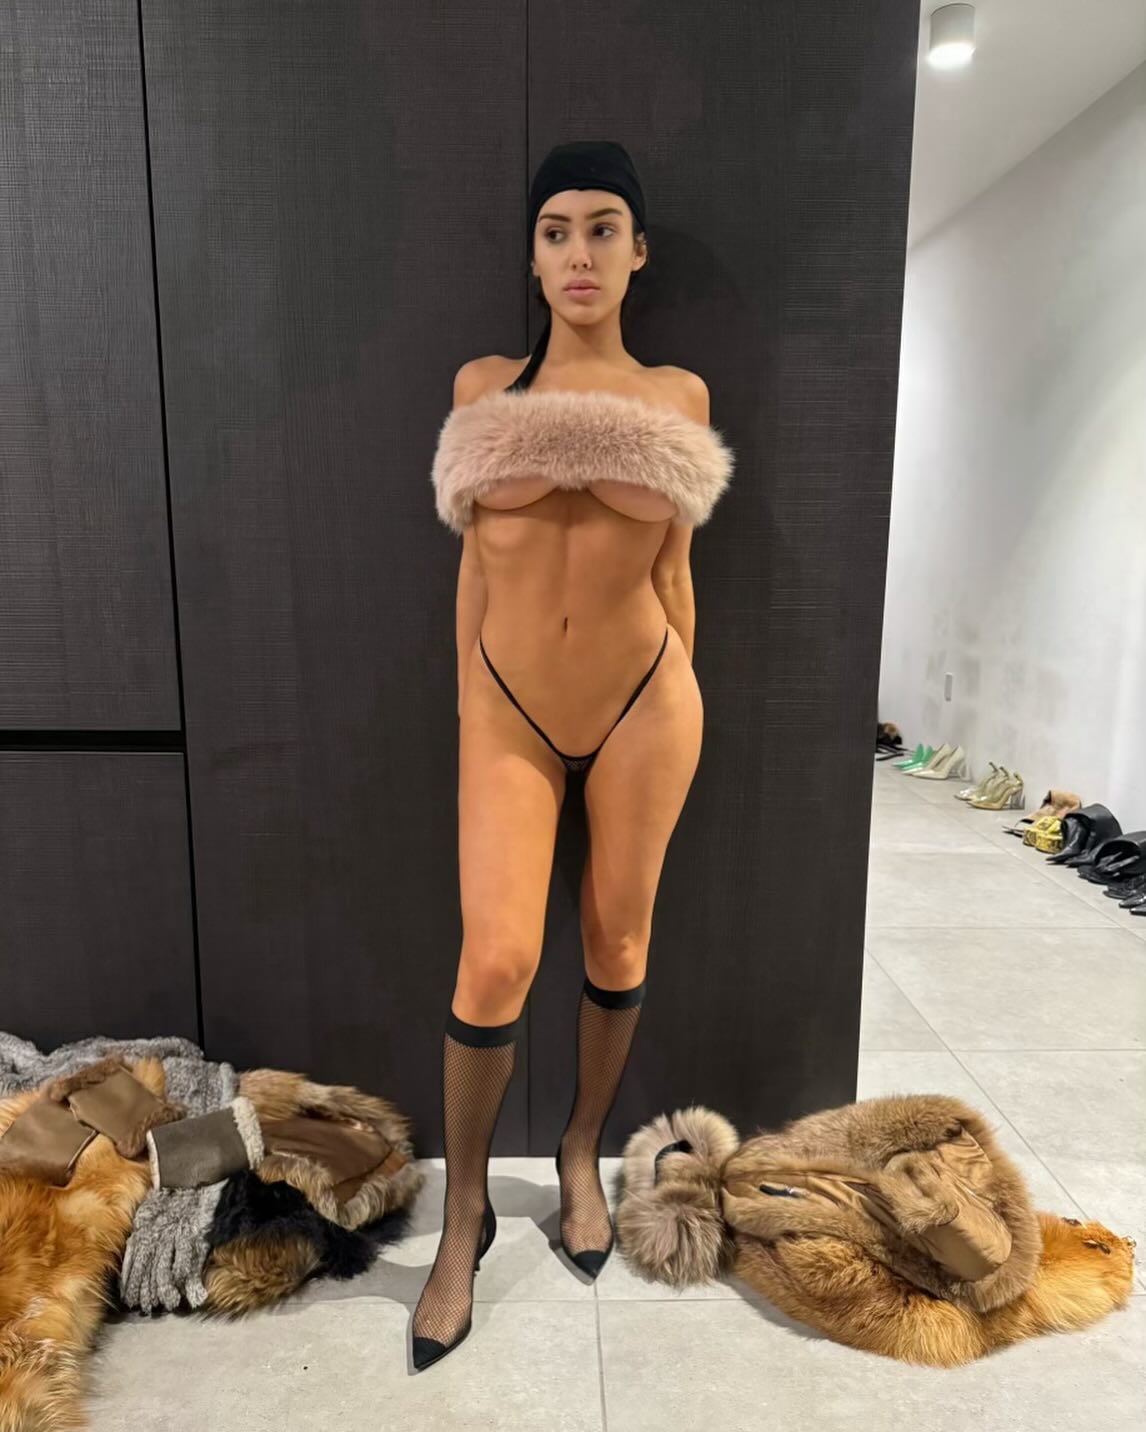 Kanye posted a risque photo of Bianca wearing a furry shawl